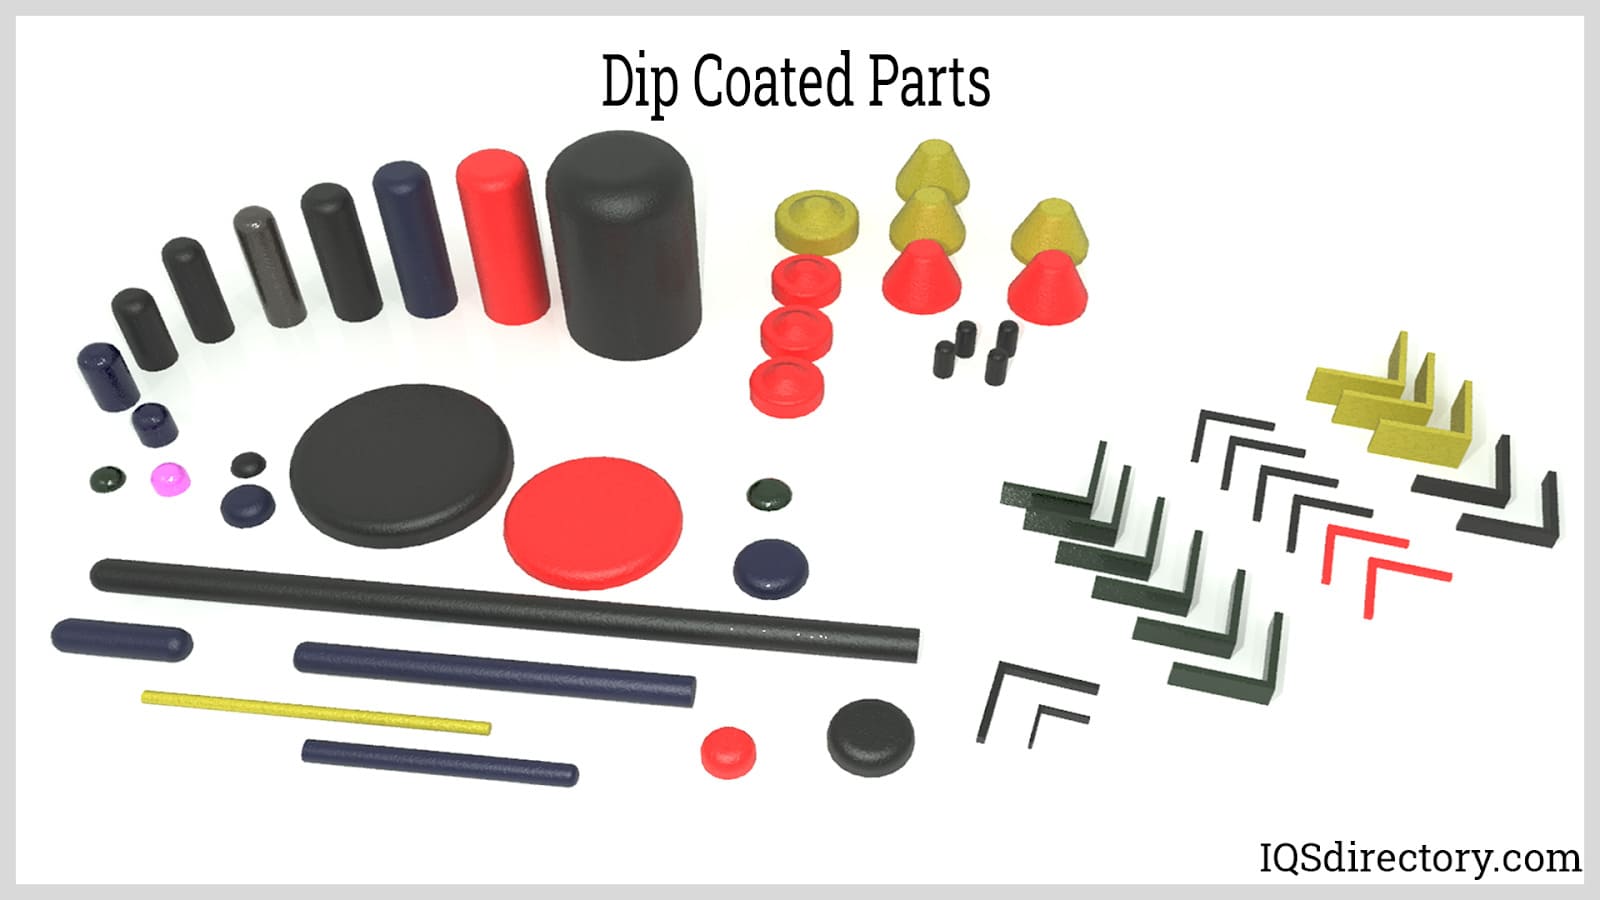 dip coated parts